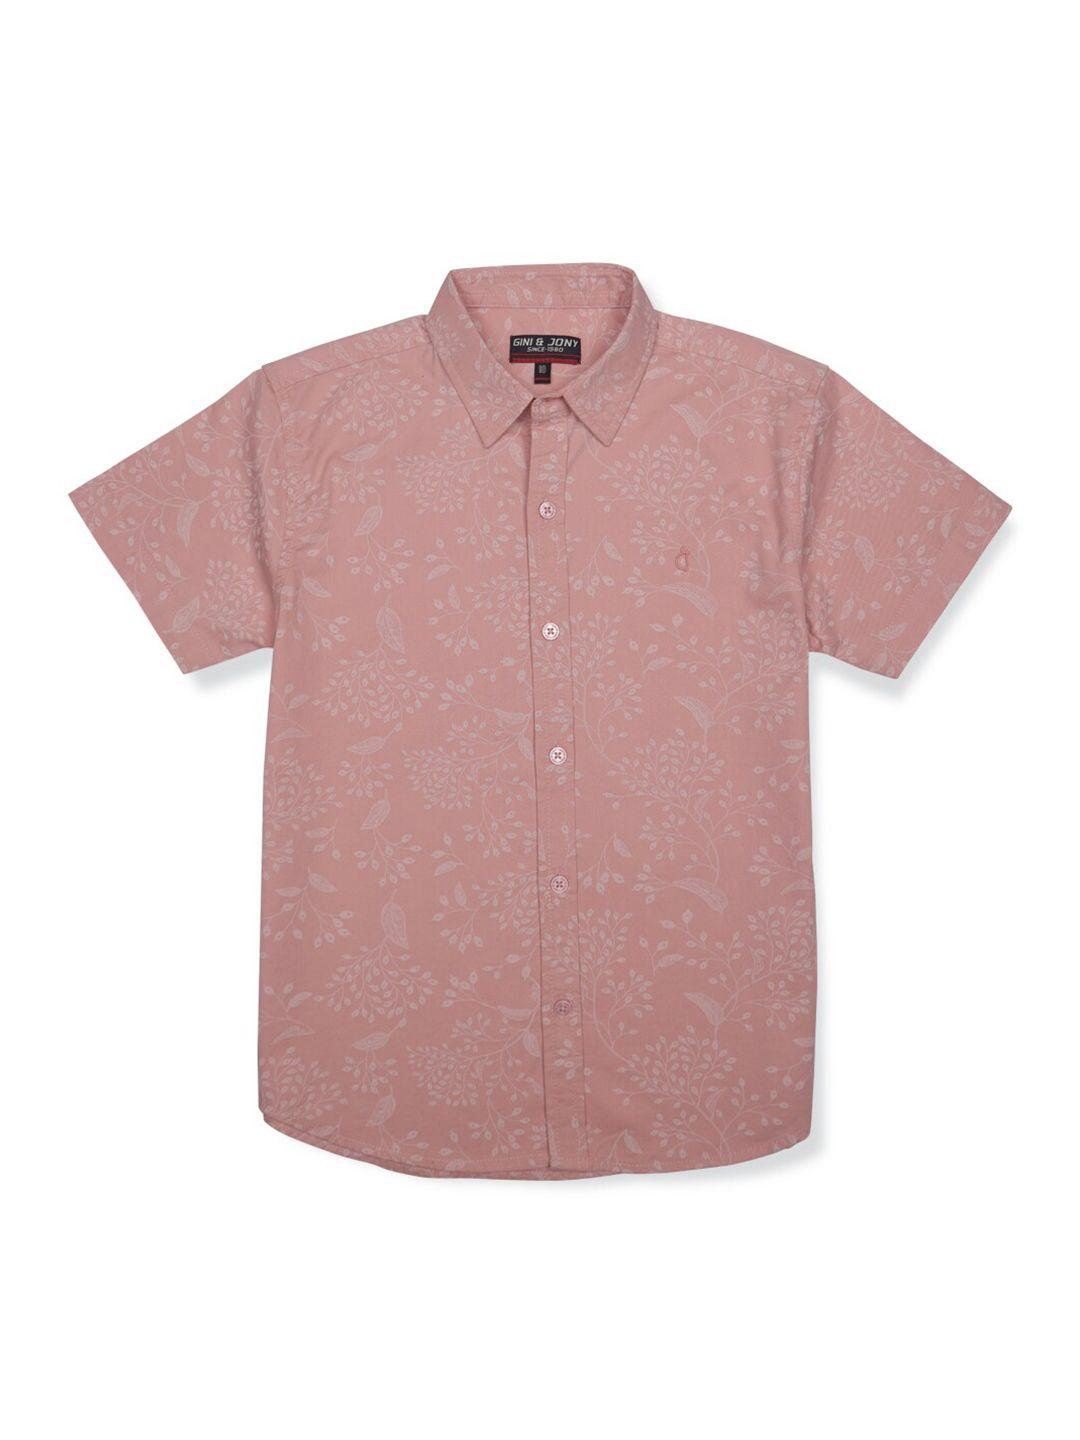 gini and jony boys floral printed cotton casual shirt